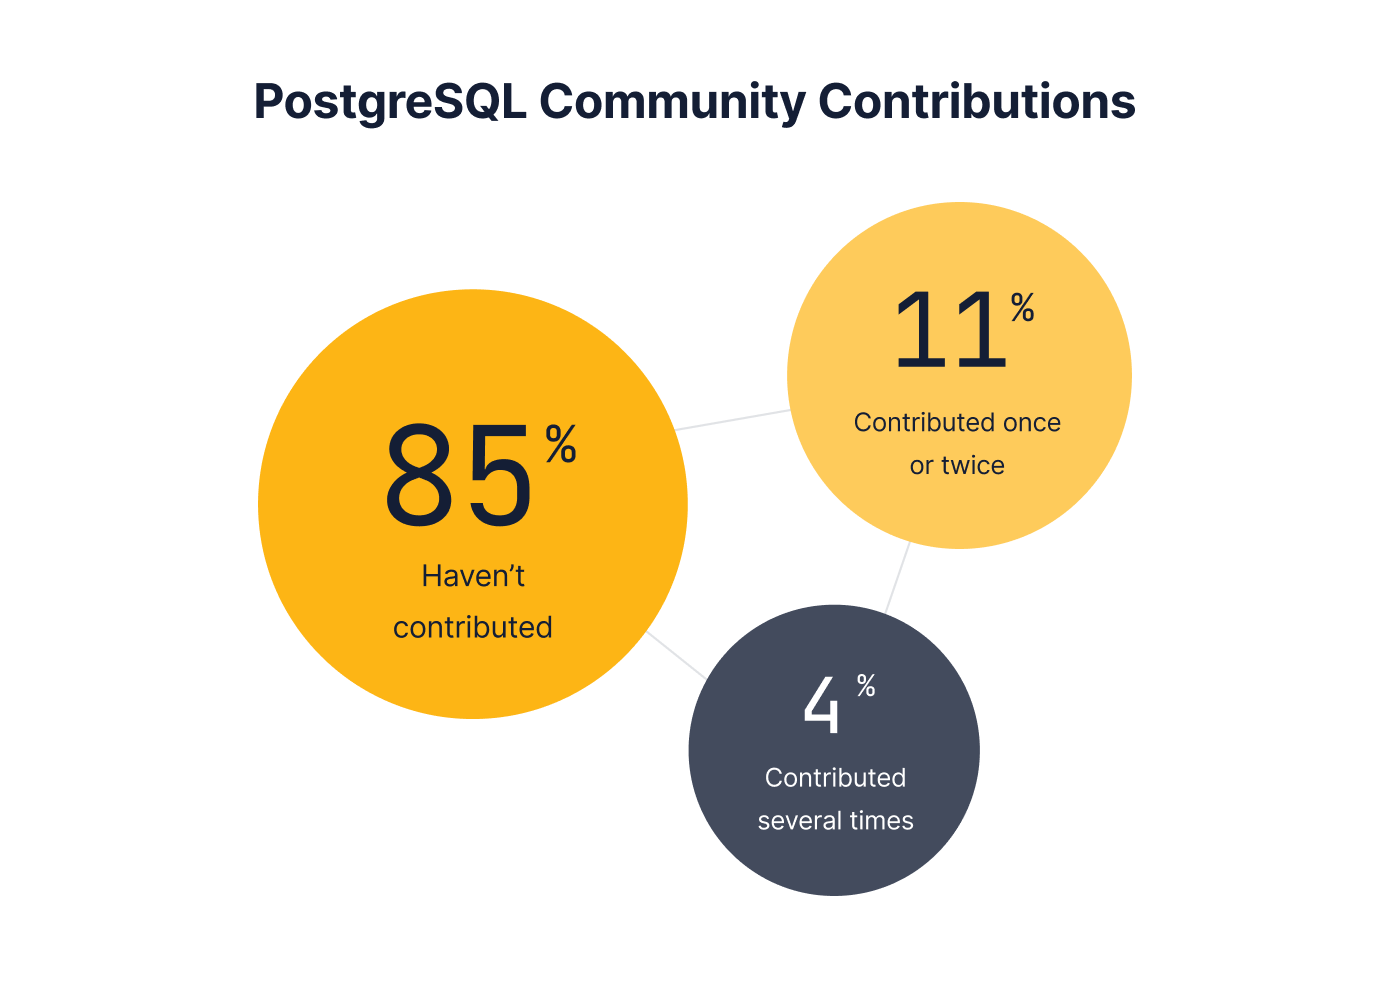 Graph showing contribution percentages of Postgres users.